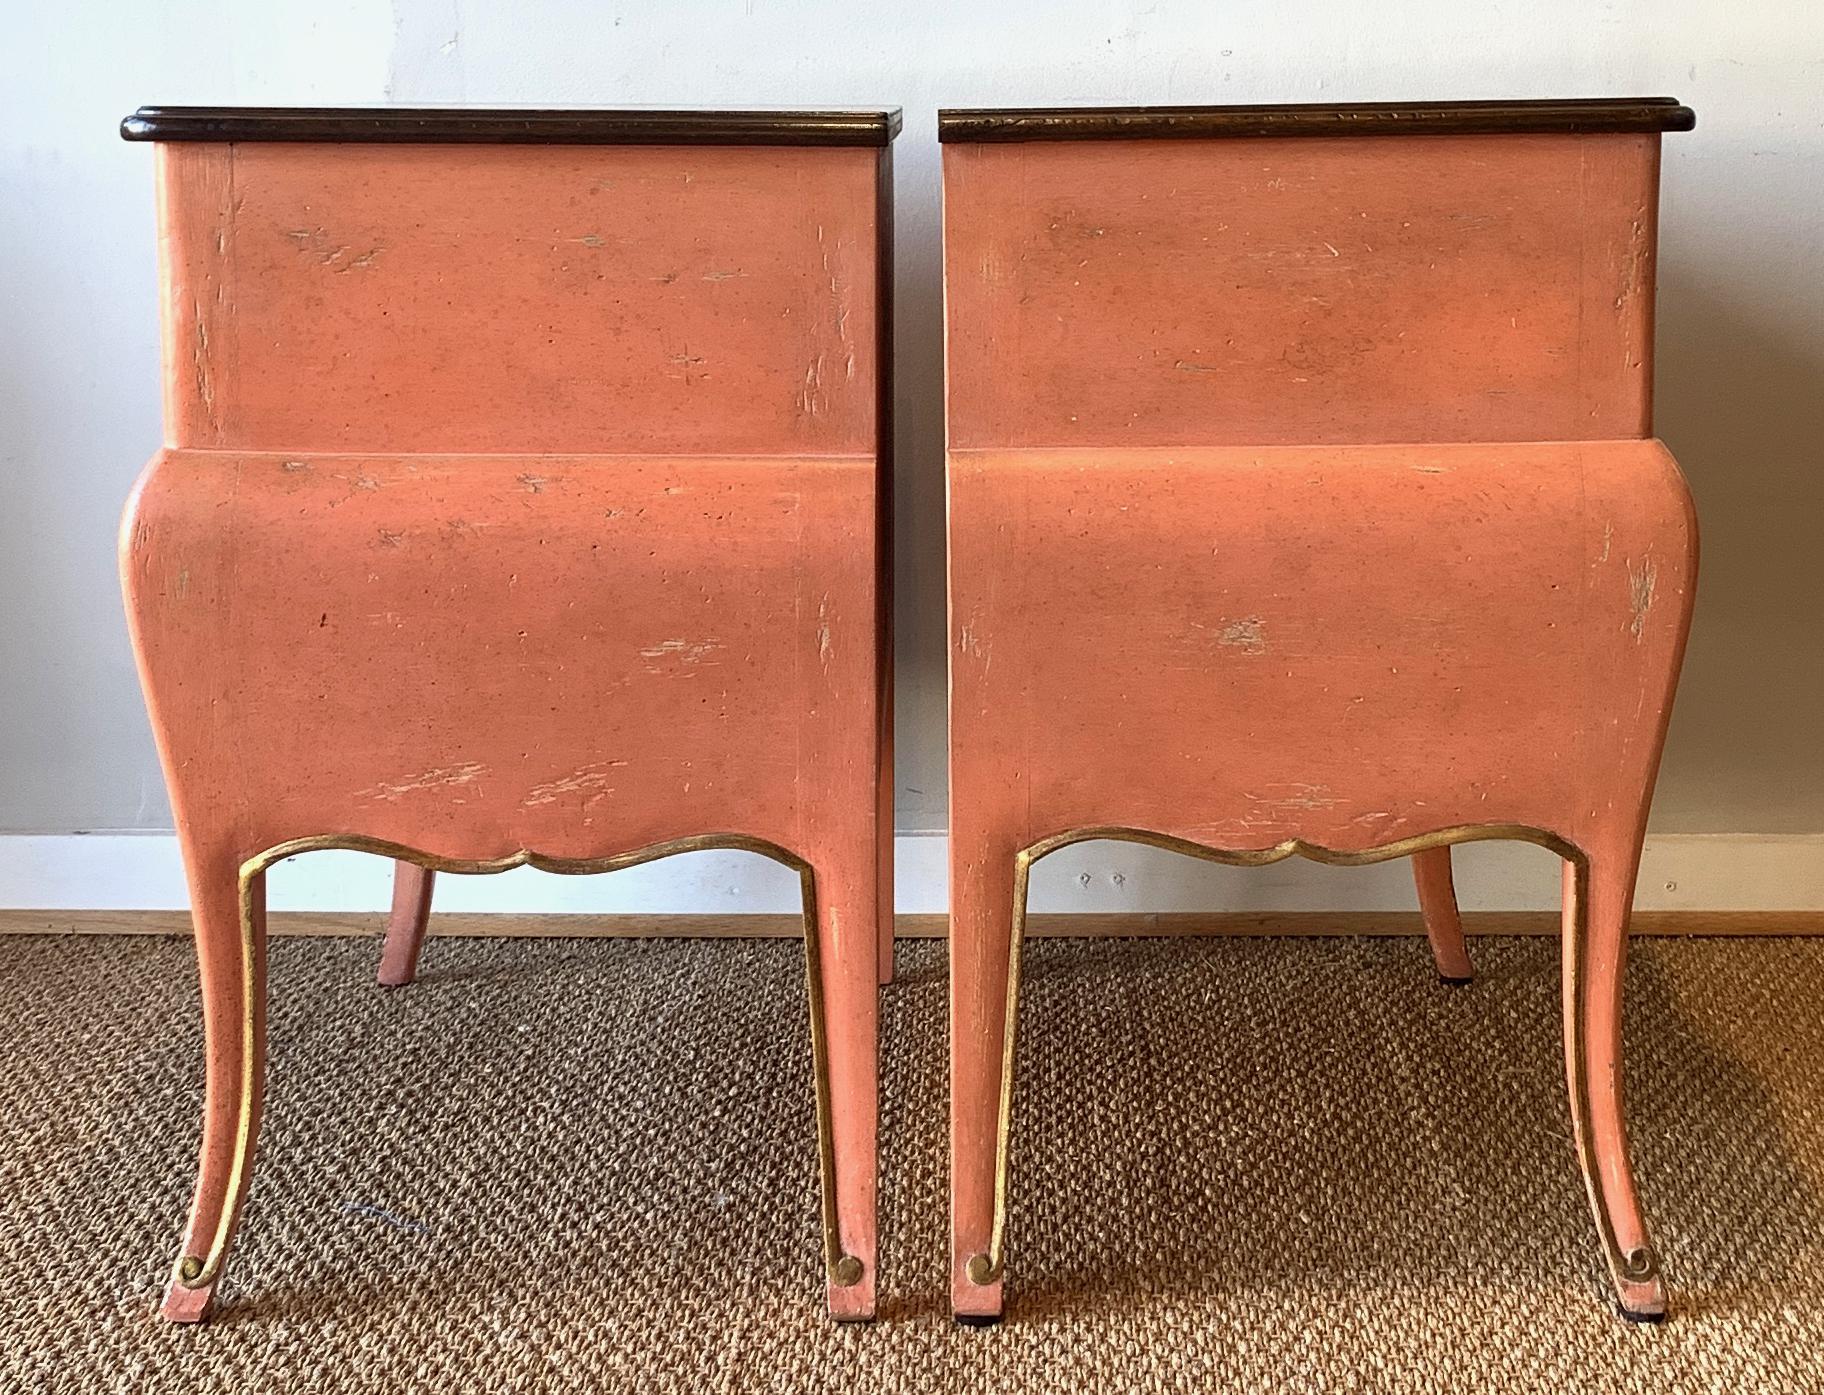 An elegant pair of mid-20th century. salmon colored two-drawer bombé side or night tables with gilt decoration made by the New York manufacturer, Auffray & Co.